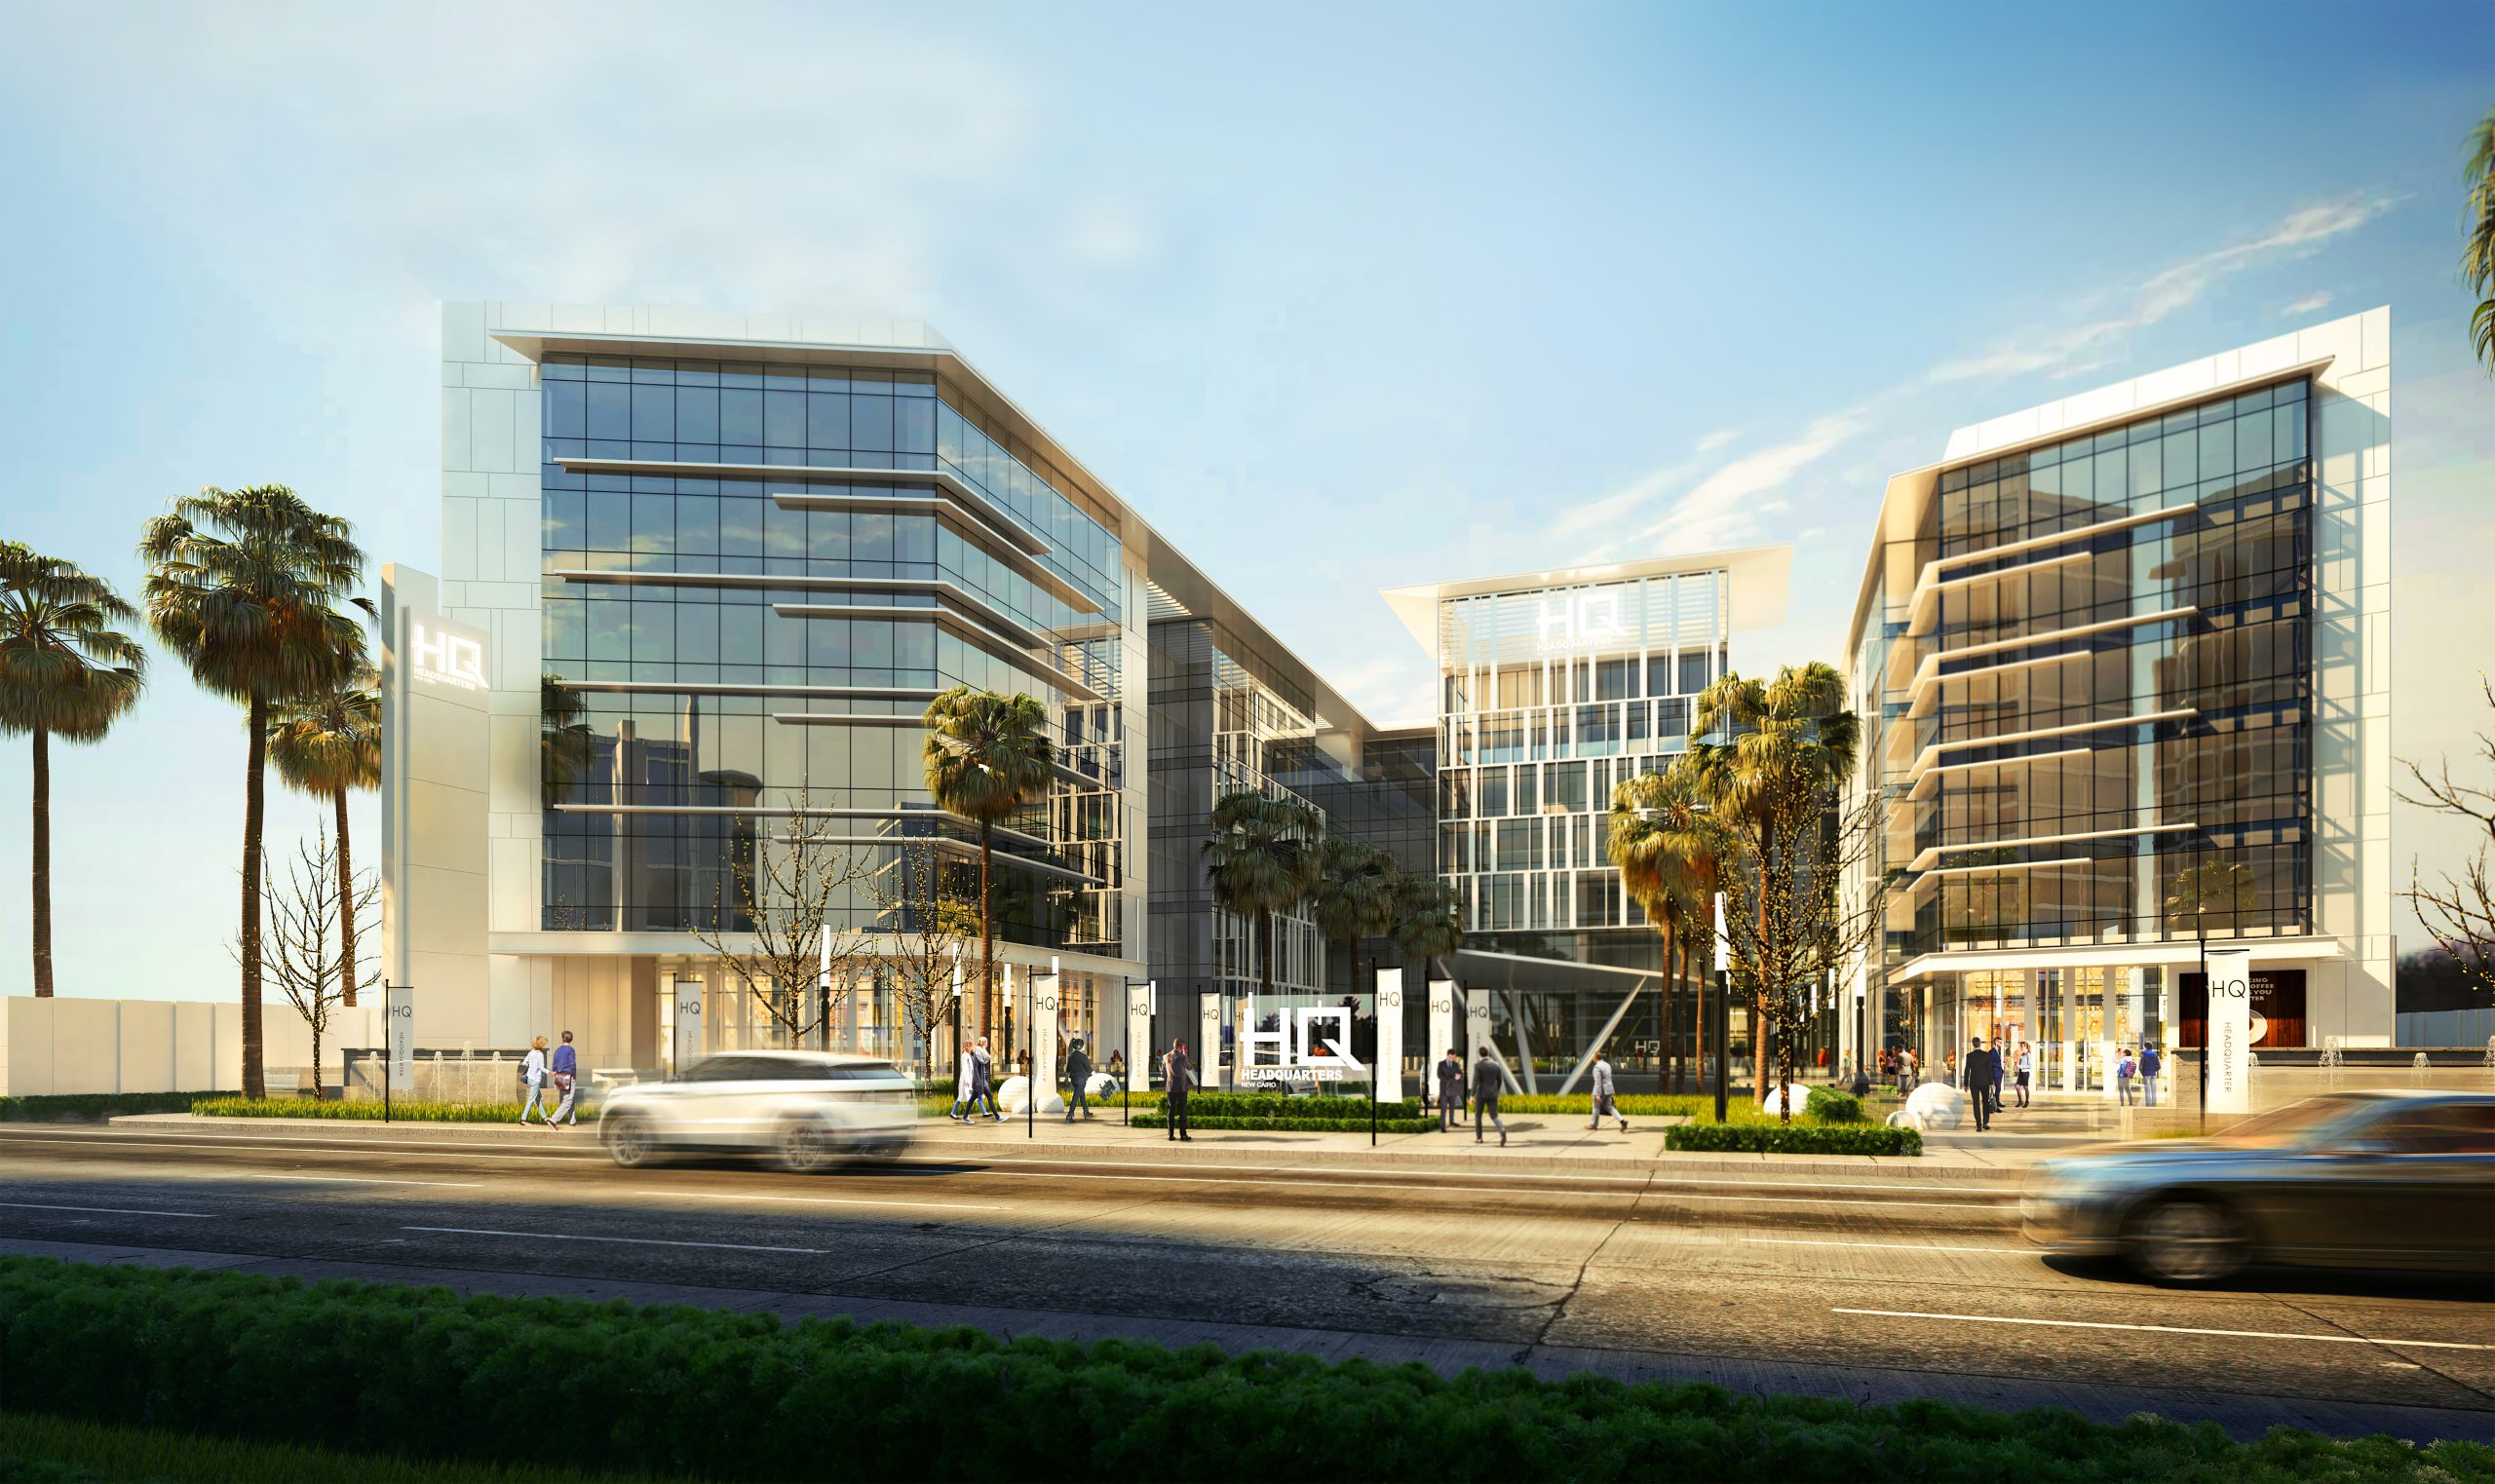 Metawee’ Group to launch “Headquarter business” the Administrative Project in Al Tagmou’ Al Khames